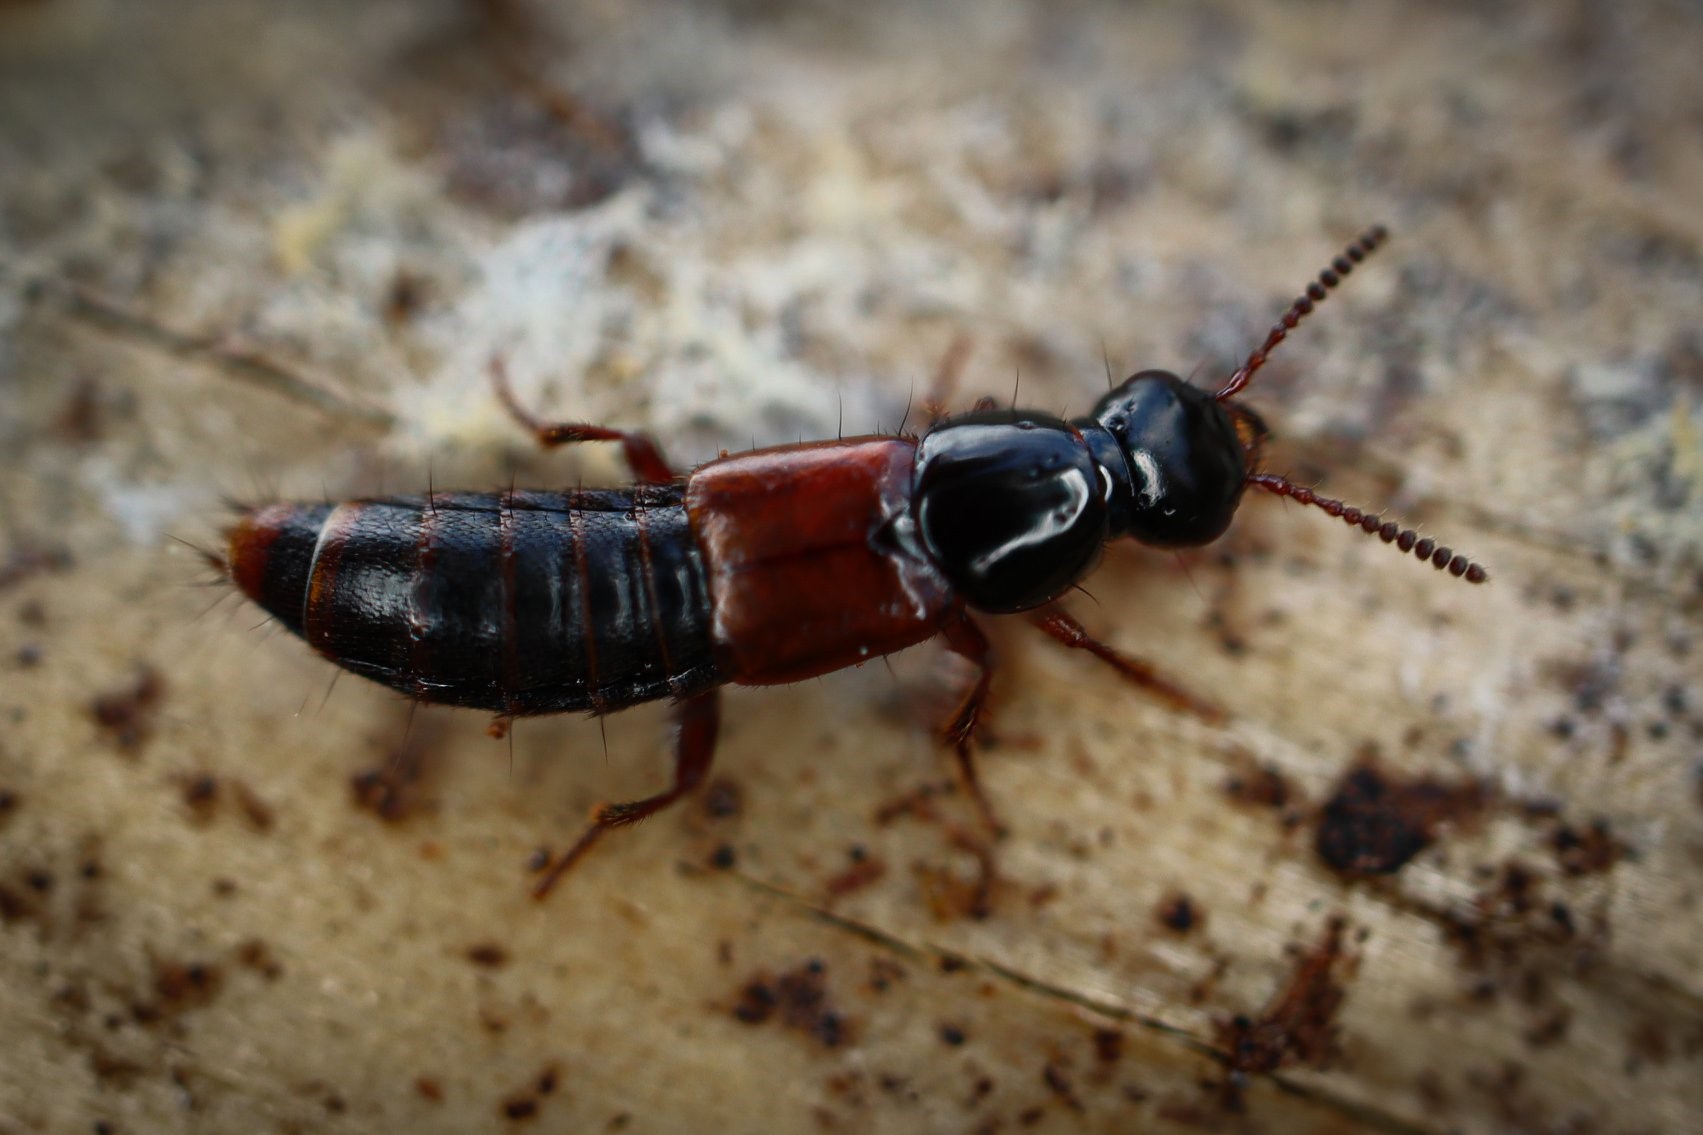 There are 47,000 described ground beetle species that are found in many different habitats.  Photo credit - Aslak Kappel Hansen